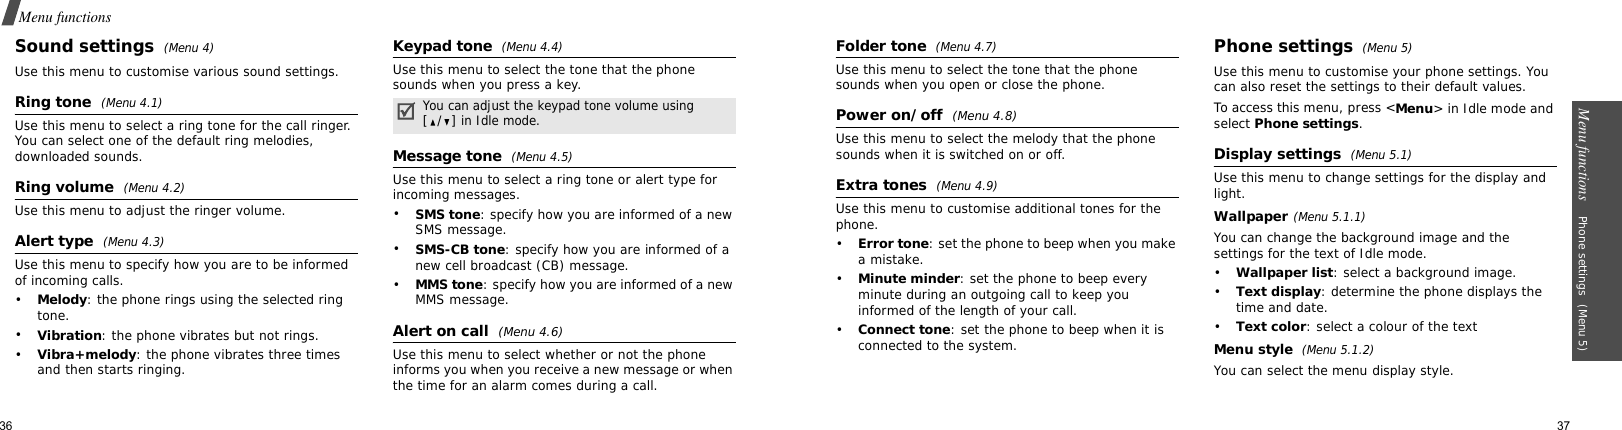 36Menu functionsSound settings (Menu 4)Use this menu to customise various sound settings.Ring tone  (Menu 4.1)Use this menu to select a ring tone for the call ringer. You can select one of the default ring melodies, downloaded sounds.Ring volume  (Menu 4.2)Use this menu to adjust the ringer volume.Alert type  (Menu 4.3)Use this menu to specify how you are to be informed of incoming calls.•Melody: the phone rings using the selected ring tone.•Vibration: the phone vibrates but not rings.•Vibra+melody: the phone vibrates three times and then starts ringing.Keypad tone (Menu 4.4)Use this menu to select the tone that the phone sounds when you press a key.Message tone (Menu 4.5)Use this menu to select a ring tone or alert type for incoming messages.•SMS tone: specify how you are informed of a new SMS message.•SMS-CB tone: specify how you are informed of a new cell broadcast (CB) message.•MMS tone: specify how you are informed of a new MMS message.Alert on call  (Menu 4.6)Use this menu to select whether or not the phone informs you when you receive a new message or when the time for an alarm comes during a call.You can adjust the keypad tone volume using [/] in Idle mode.Menu functions    Phone settings (Menu 5)37Folder tone (Menu 4.7)Use this menu to select the tone that the phone sounds when you open or close the phone.Power on/off (Menu 4.8)Use this menu to select the melody that the phone sounds when it is switched on or off.Extra tones (Menu 4.9)Use this menu to customise additional tones for the phone.•Error tone: set the phone to beep when you make a mistake.•Minute minder: set the phone to beep every minute during an outgoing call to keep you informed of the length of your call.•Connect tone: set the phone to beep when it is connected to the system.Phone settings (Menu 5)Use this menu to customise your phone settings. You can also reset the settings to their default values.To access this menu, press &lt;Menu&gt; in Idle mode and select Phone settings.Display settings (Menu 5.1)Use this menu to change settings for the display and light.Wallpaper(Menu 5.1.1)You can change the background image and the settings for the text of Idle mode.•Wallpaper list: select a background image.•Text display: determine the phone displays the time and date.•Text color: select a colour of the textMenu style  (Menu 5.1.2)You can select the menu display style.